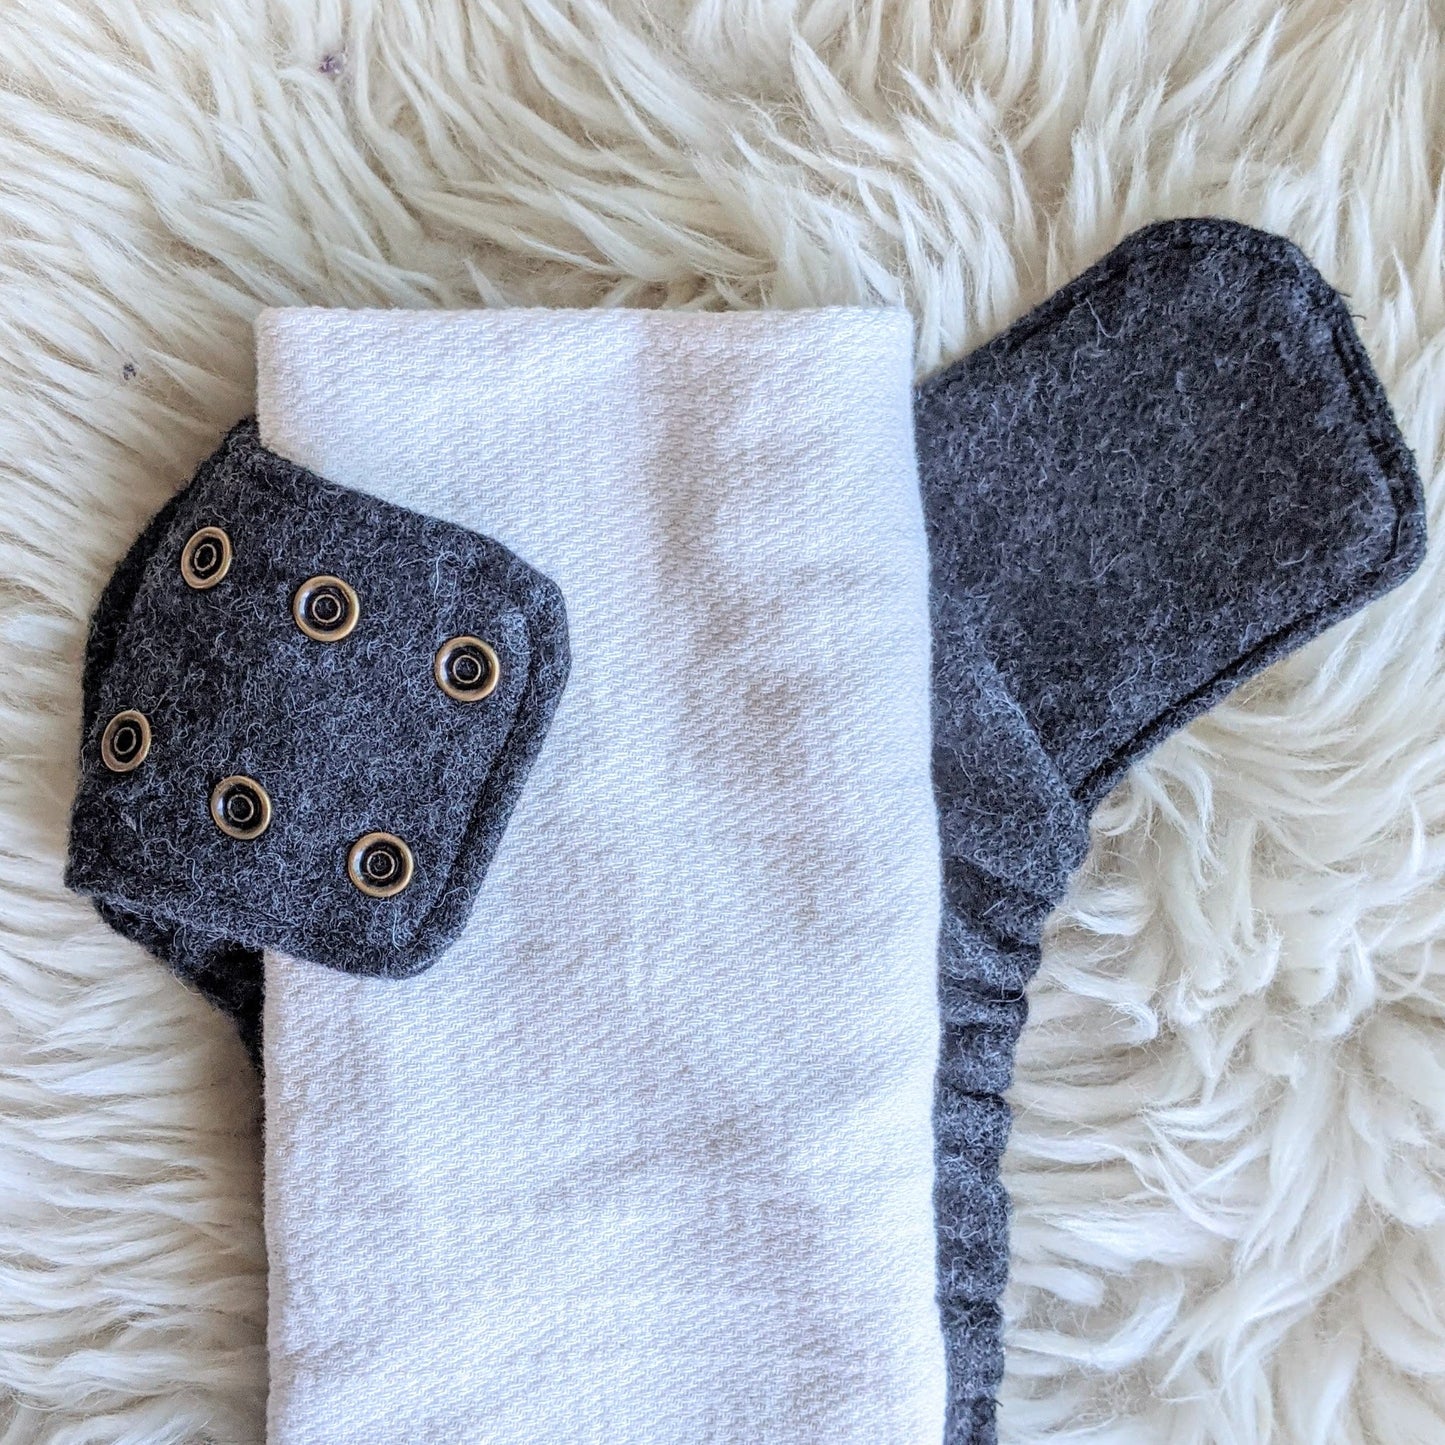 A rectangular "pad-folded" cotton flat diaper on top of a gray alpaca diaper cover with one wing wrapped around the cotton revealing 6 antique brass snaps. The diaper is on top of a fuzzy white sheepskin rug.